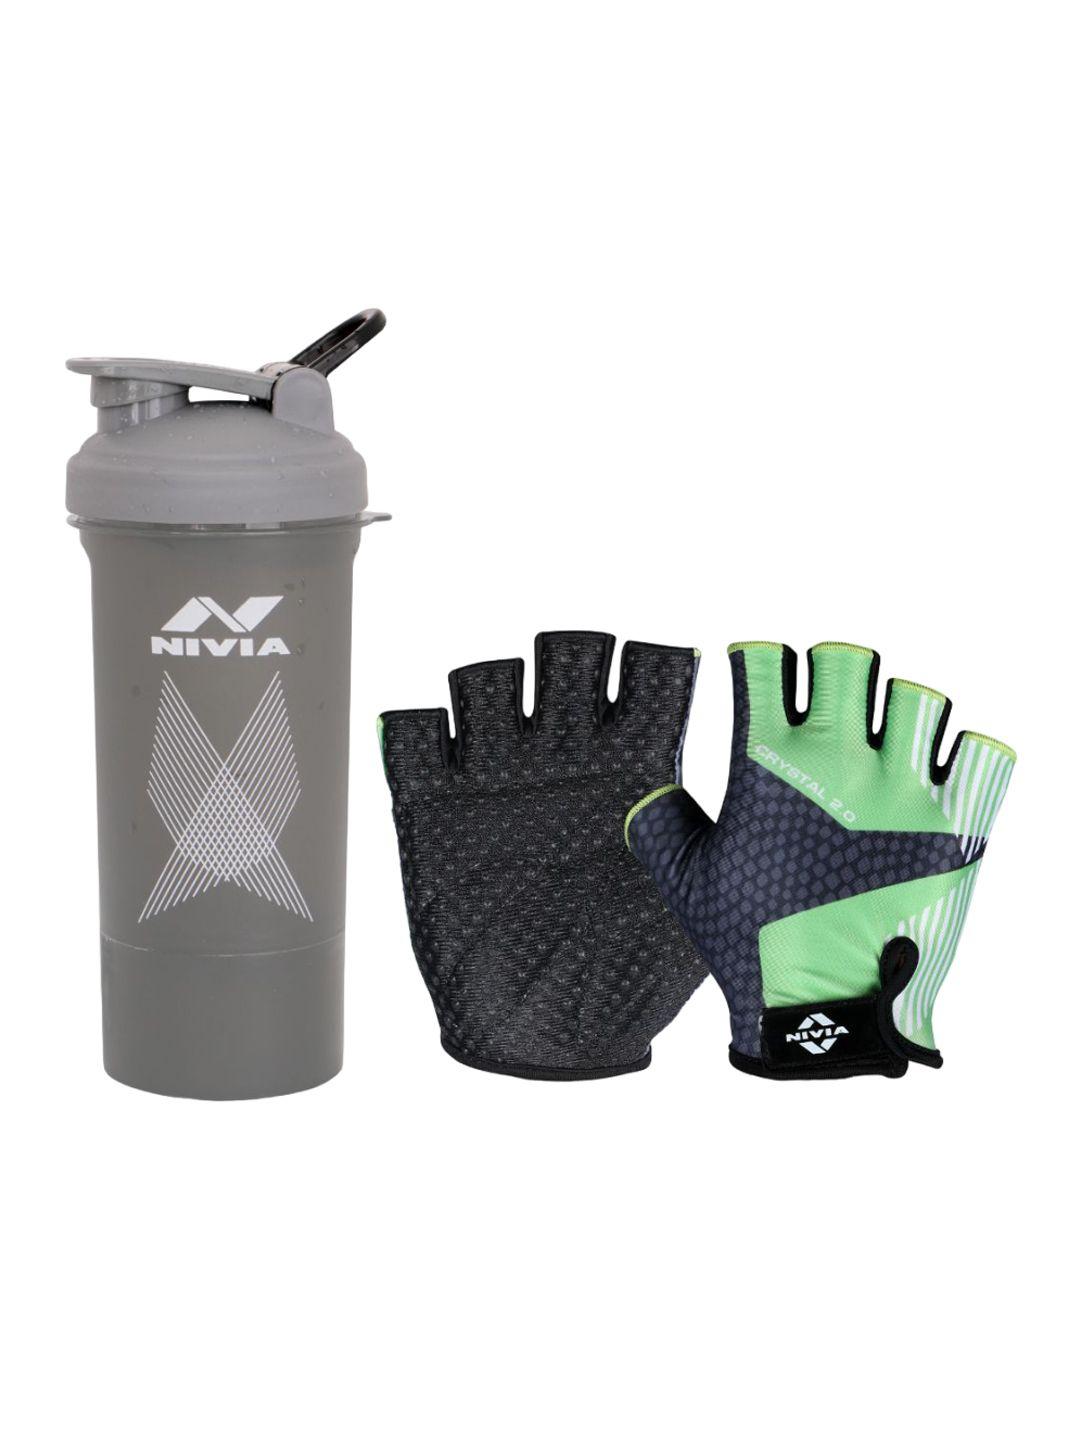 nivia textured leather gym gloves with shaker